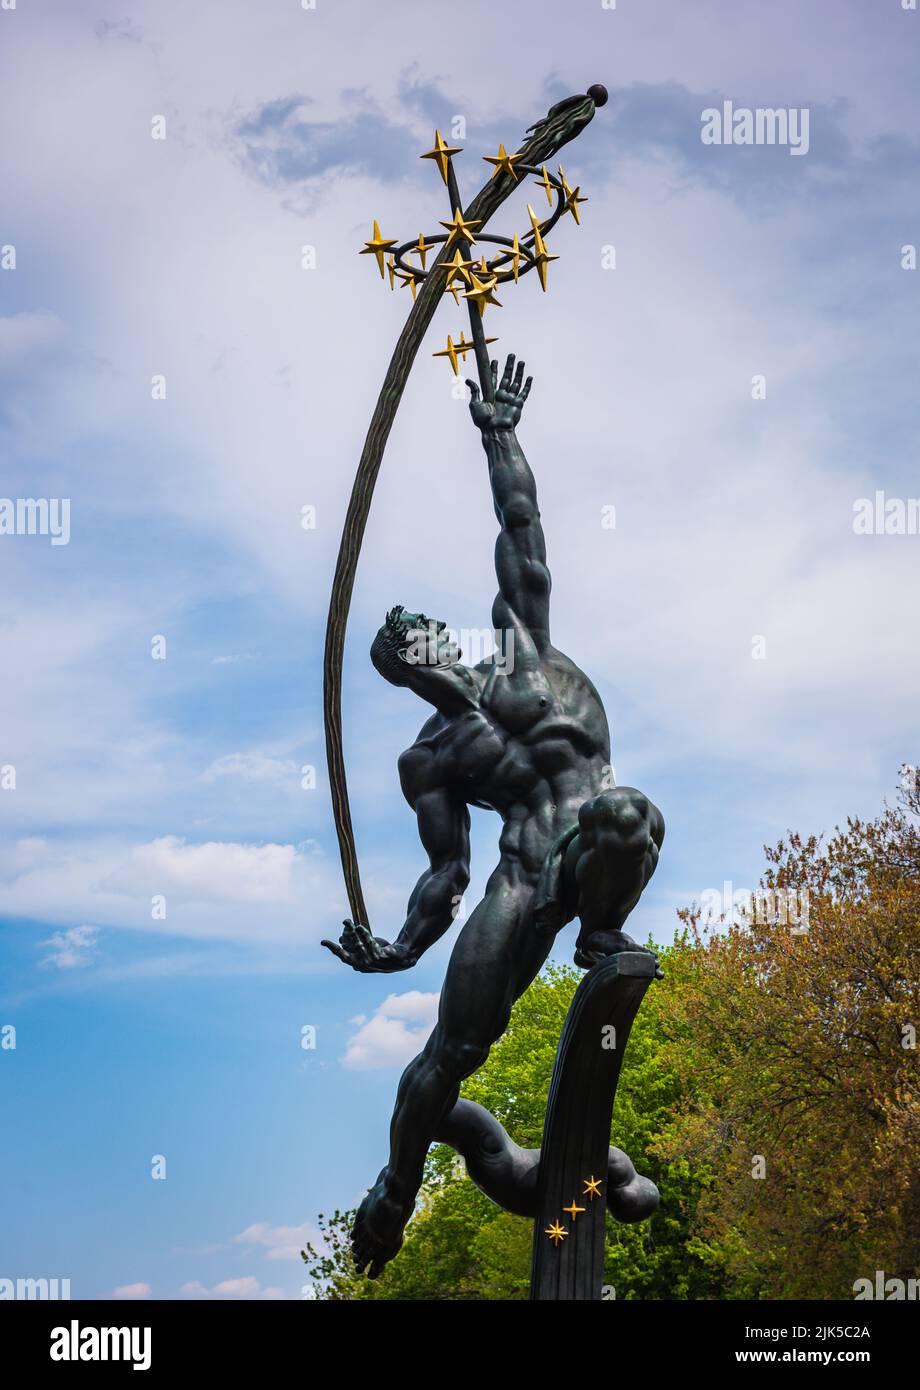 New York, NY/USA - 05-09-2016: Created for the 1964 Worlds Fair, Rocket Thrower is a 1963 bronze sculpture by American sculptor Donald De Lue. Stock Photo